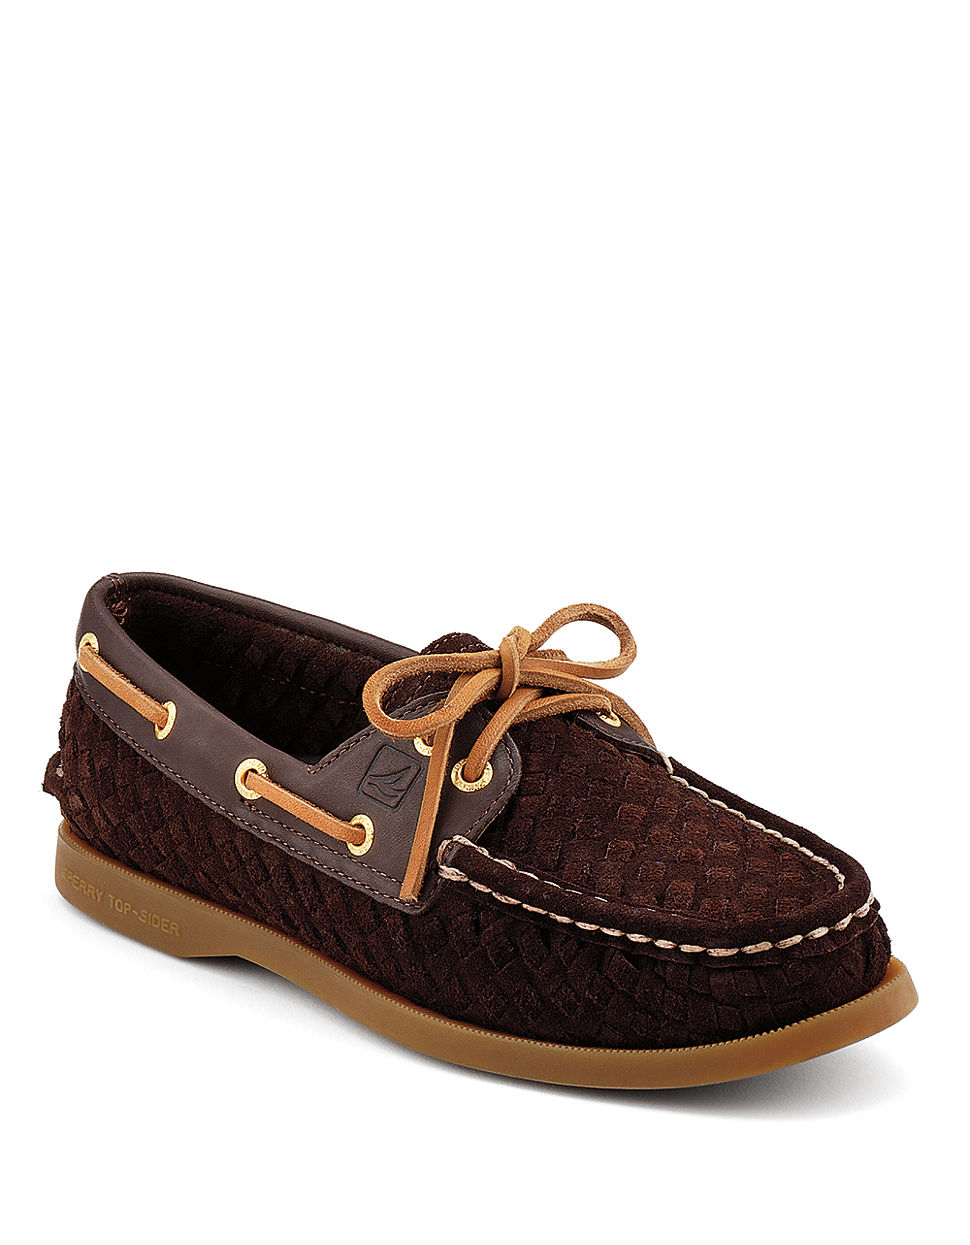 Sperry Top-sider Authentic Original Suede Boat Shoes in Brown (DARK ...